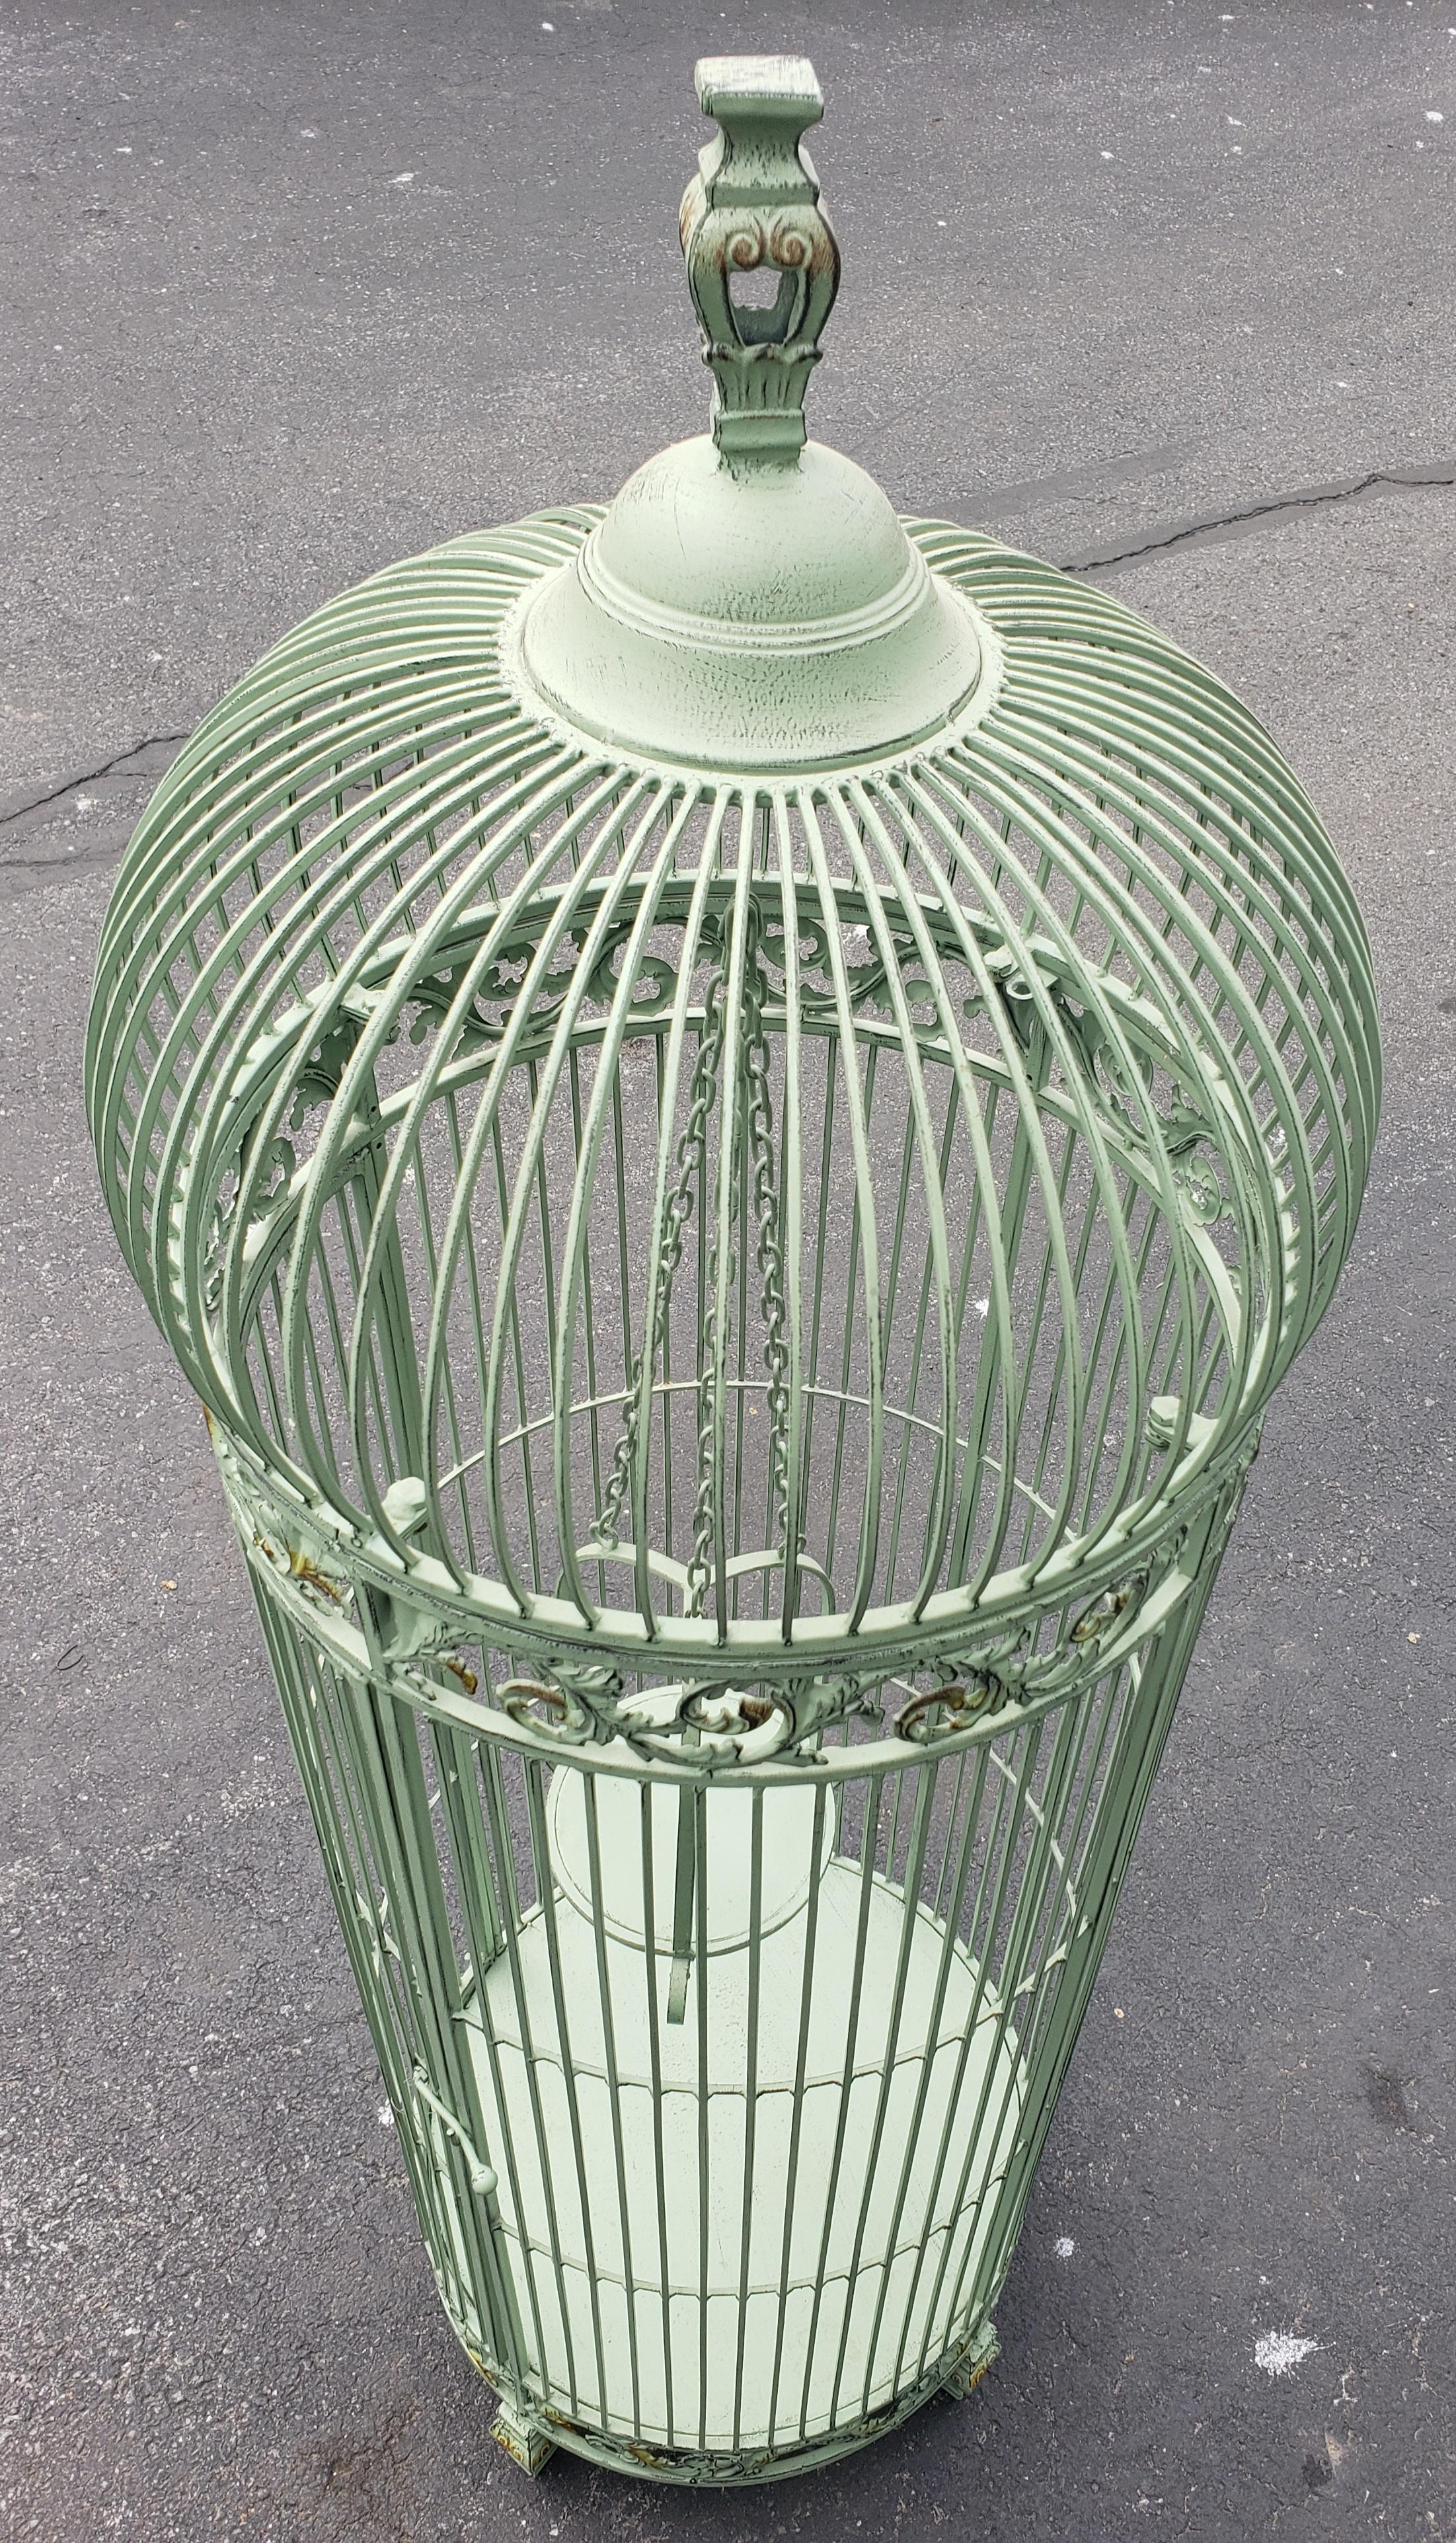 20th Century Very Large English Wrought Iron Floor Birdcage in Teal